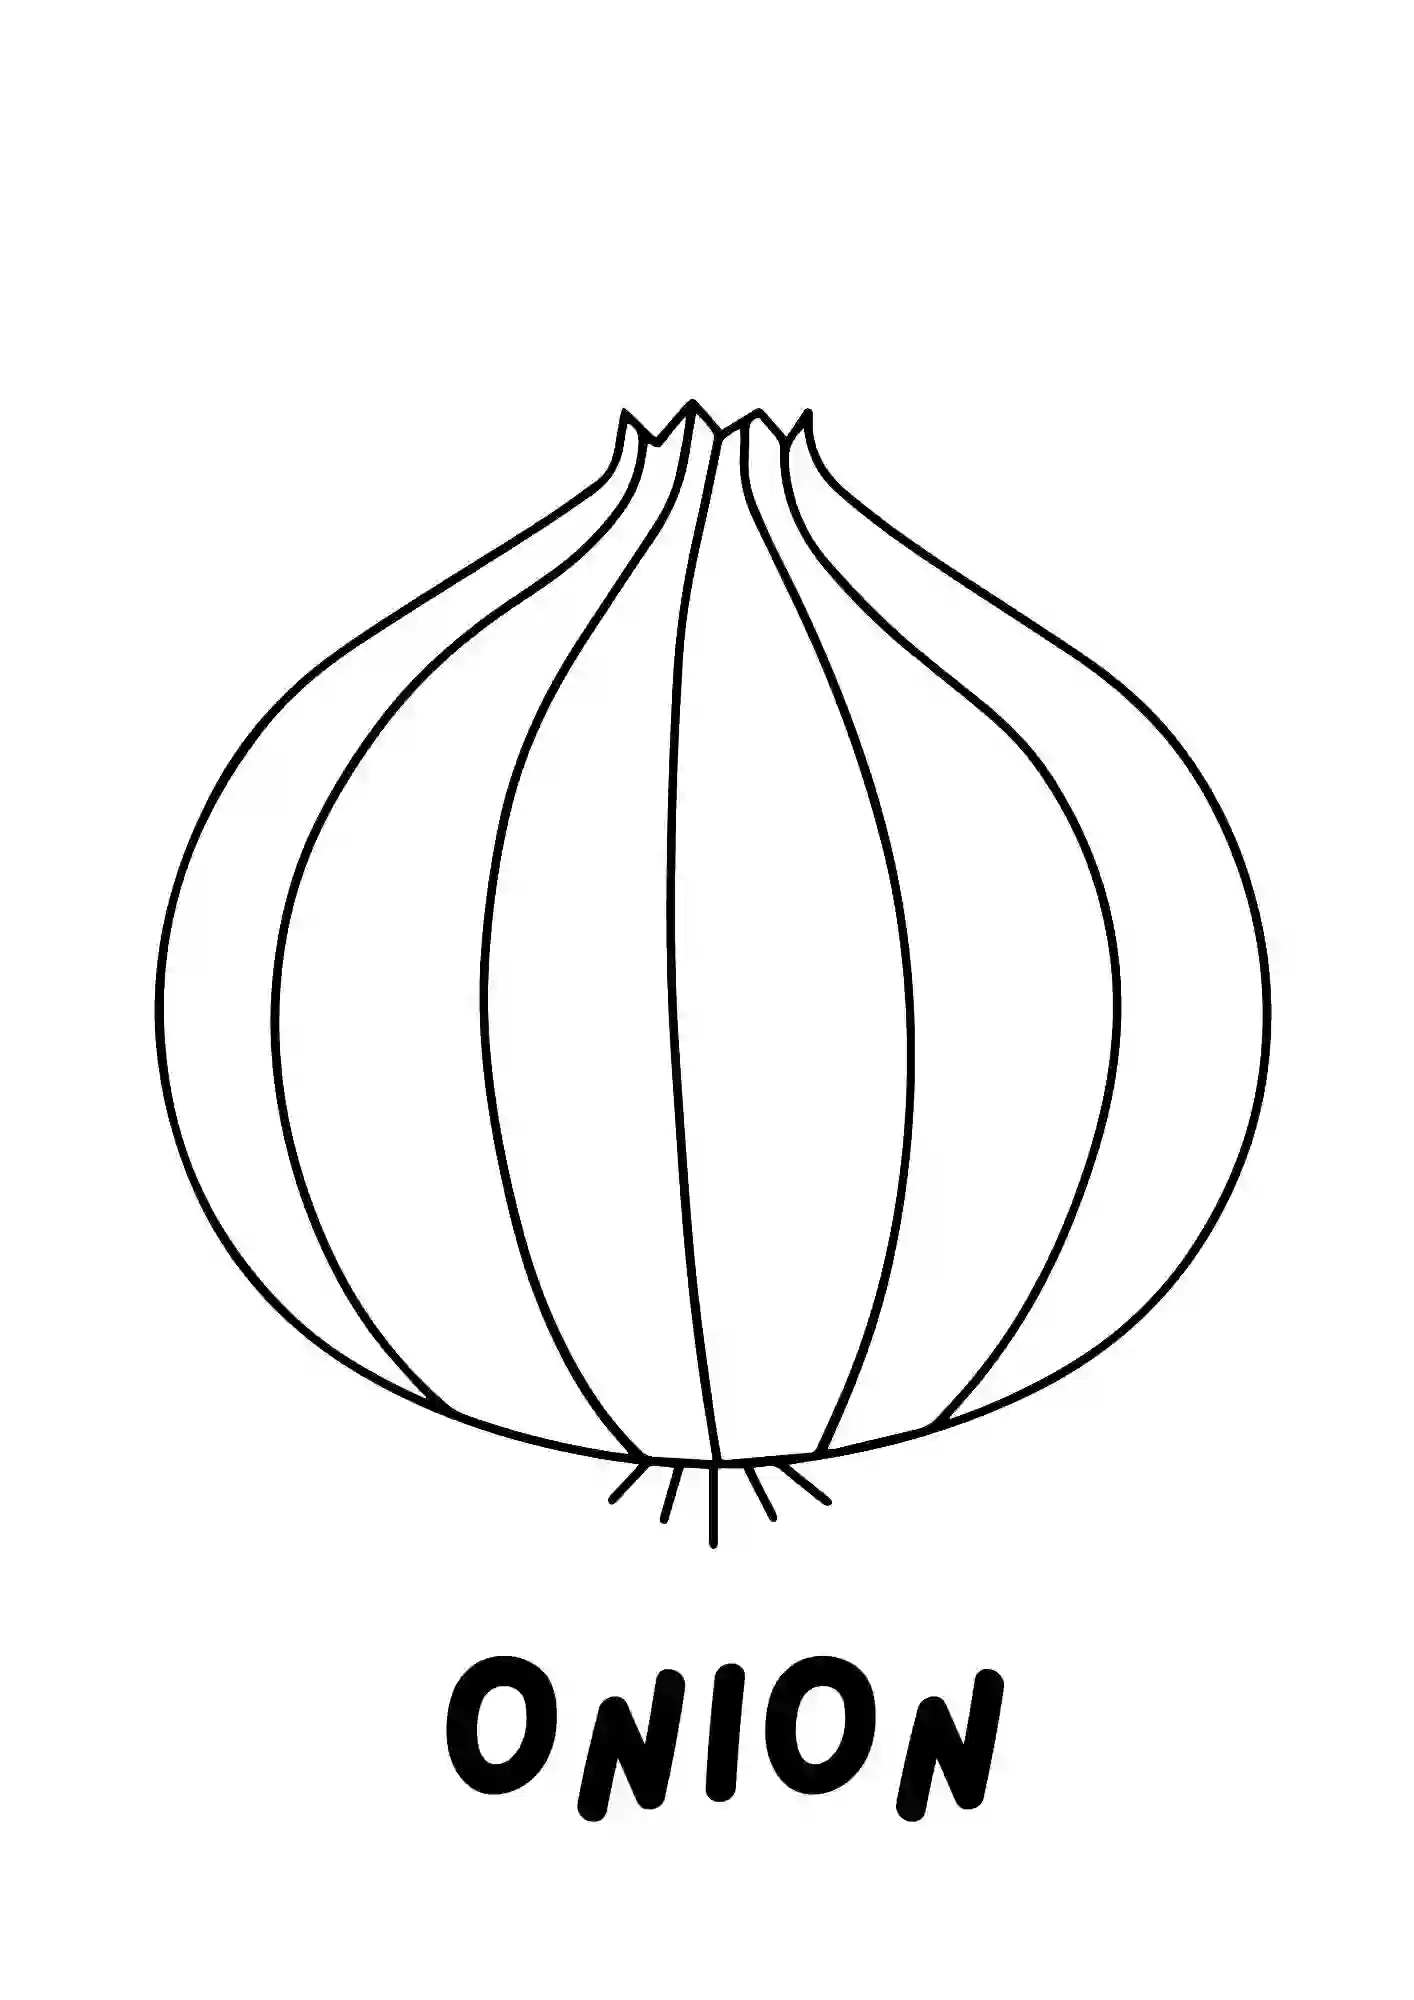 Vegetables Colouring Worksheets onion